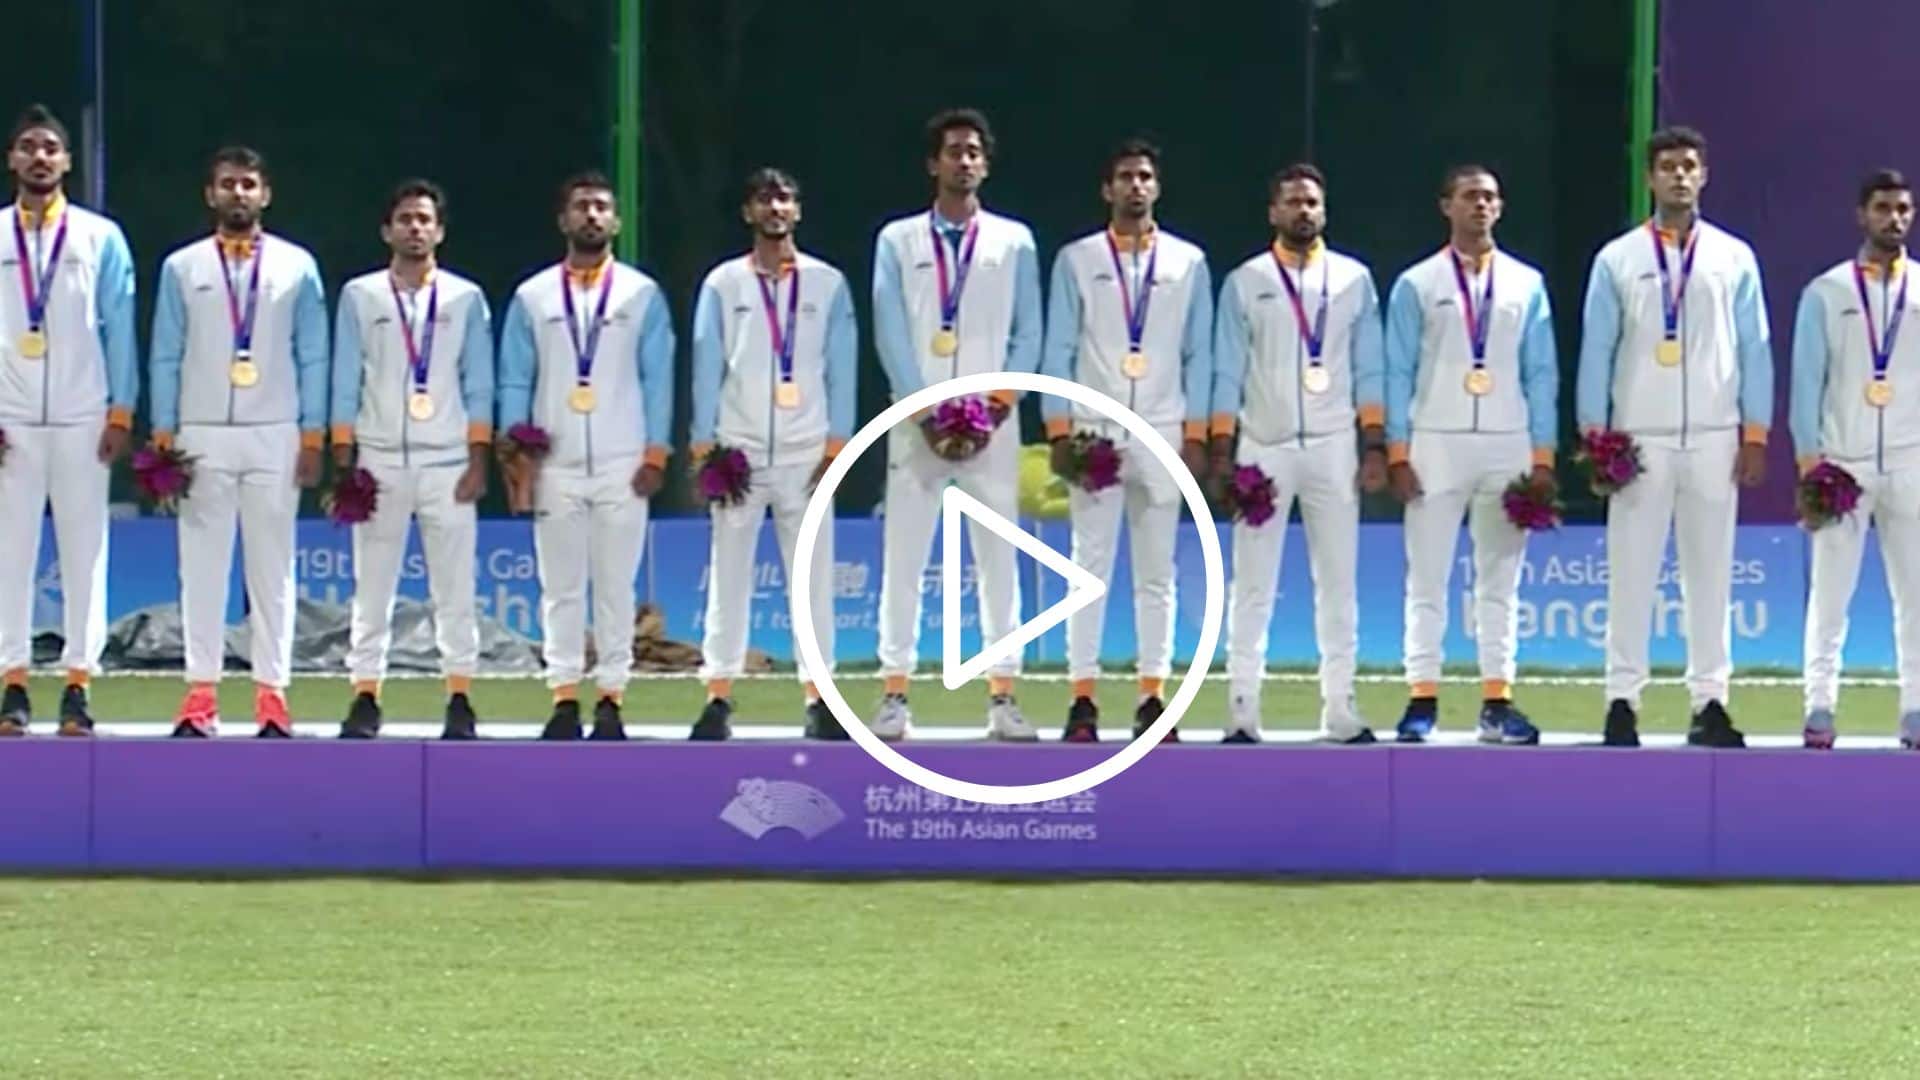 [Watch] Indian Team Receive Shining Gold Medals After Historic Asian Games Win